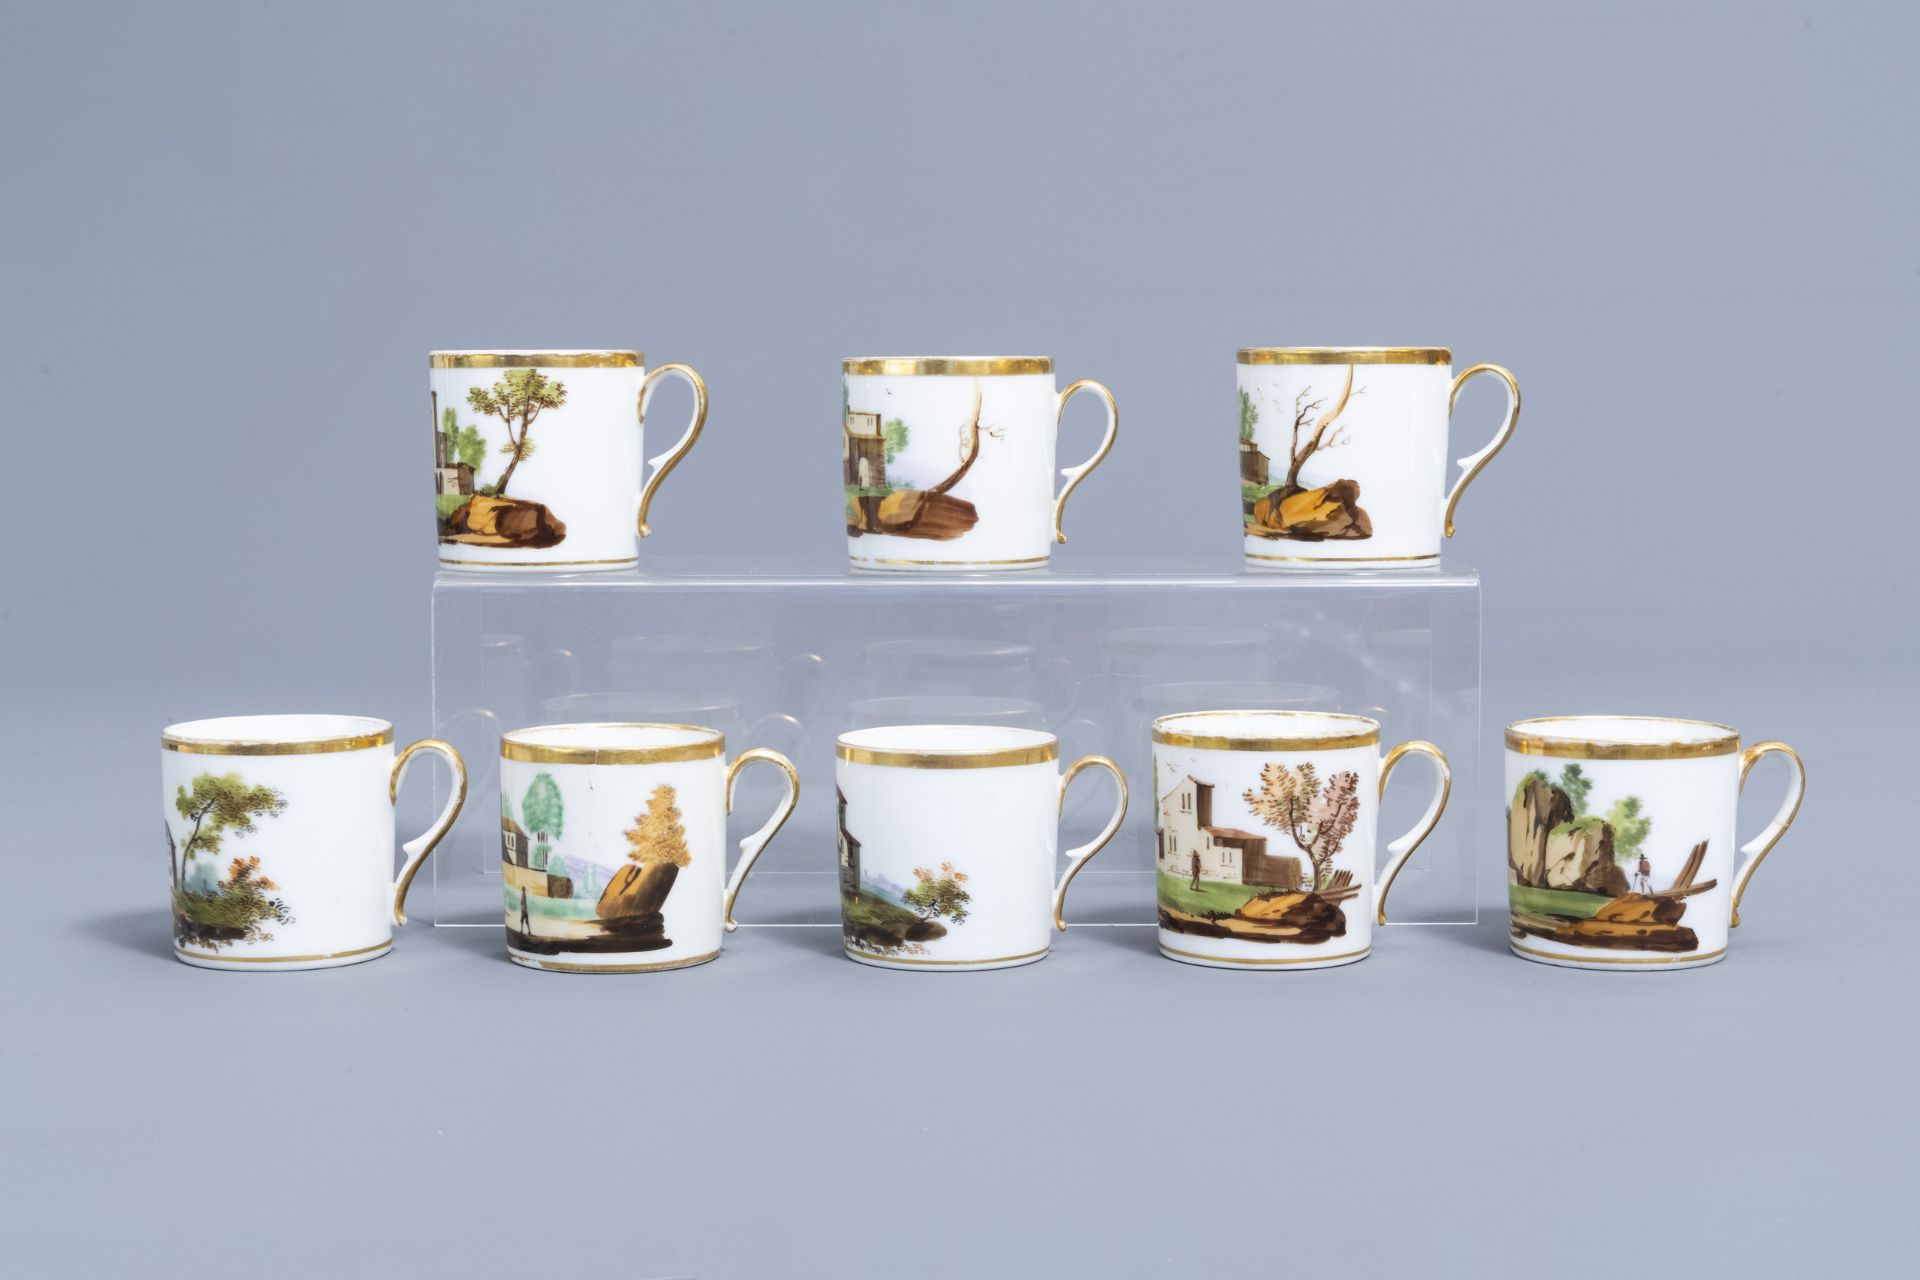 A 21-piece Paris polychrome and gilt porcelain coffee and tea service with landscapes, 19th C. - Image 42 of 46